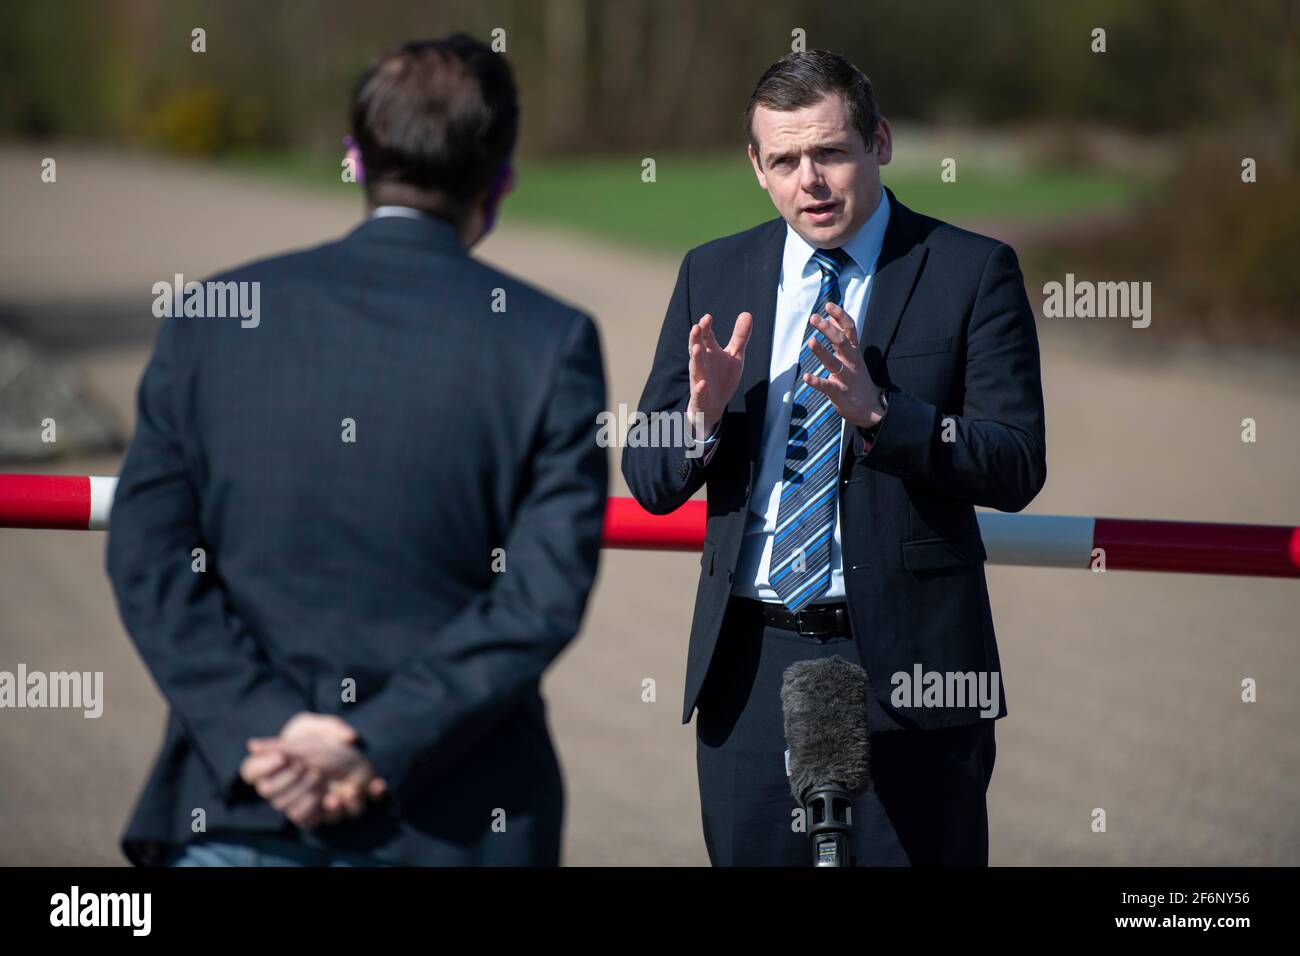 Glasgow, Scotland, UK. 2nd Apr, 2021. PICTURED: Douglas Ross MP, Leader of the Scottish Conservative and Unionist Party. Scottish Conservative proposals for demand-led apprenticeships and expand on the party's plans for a skills revolution as the Scottish Conservative Leader visits Thales Optronics in Glasgow. Credit: Colin Fisher/Alamy Live News Stock Photo